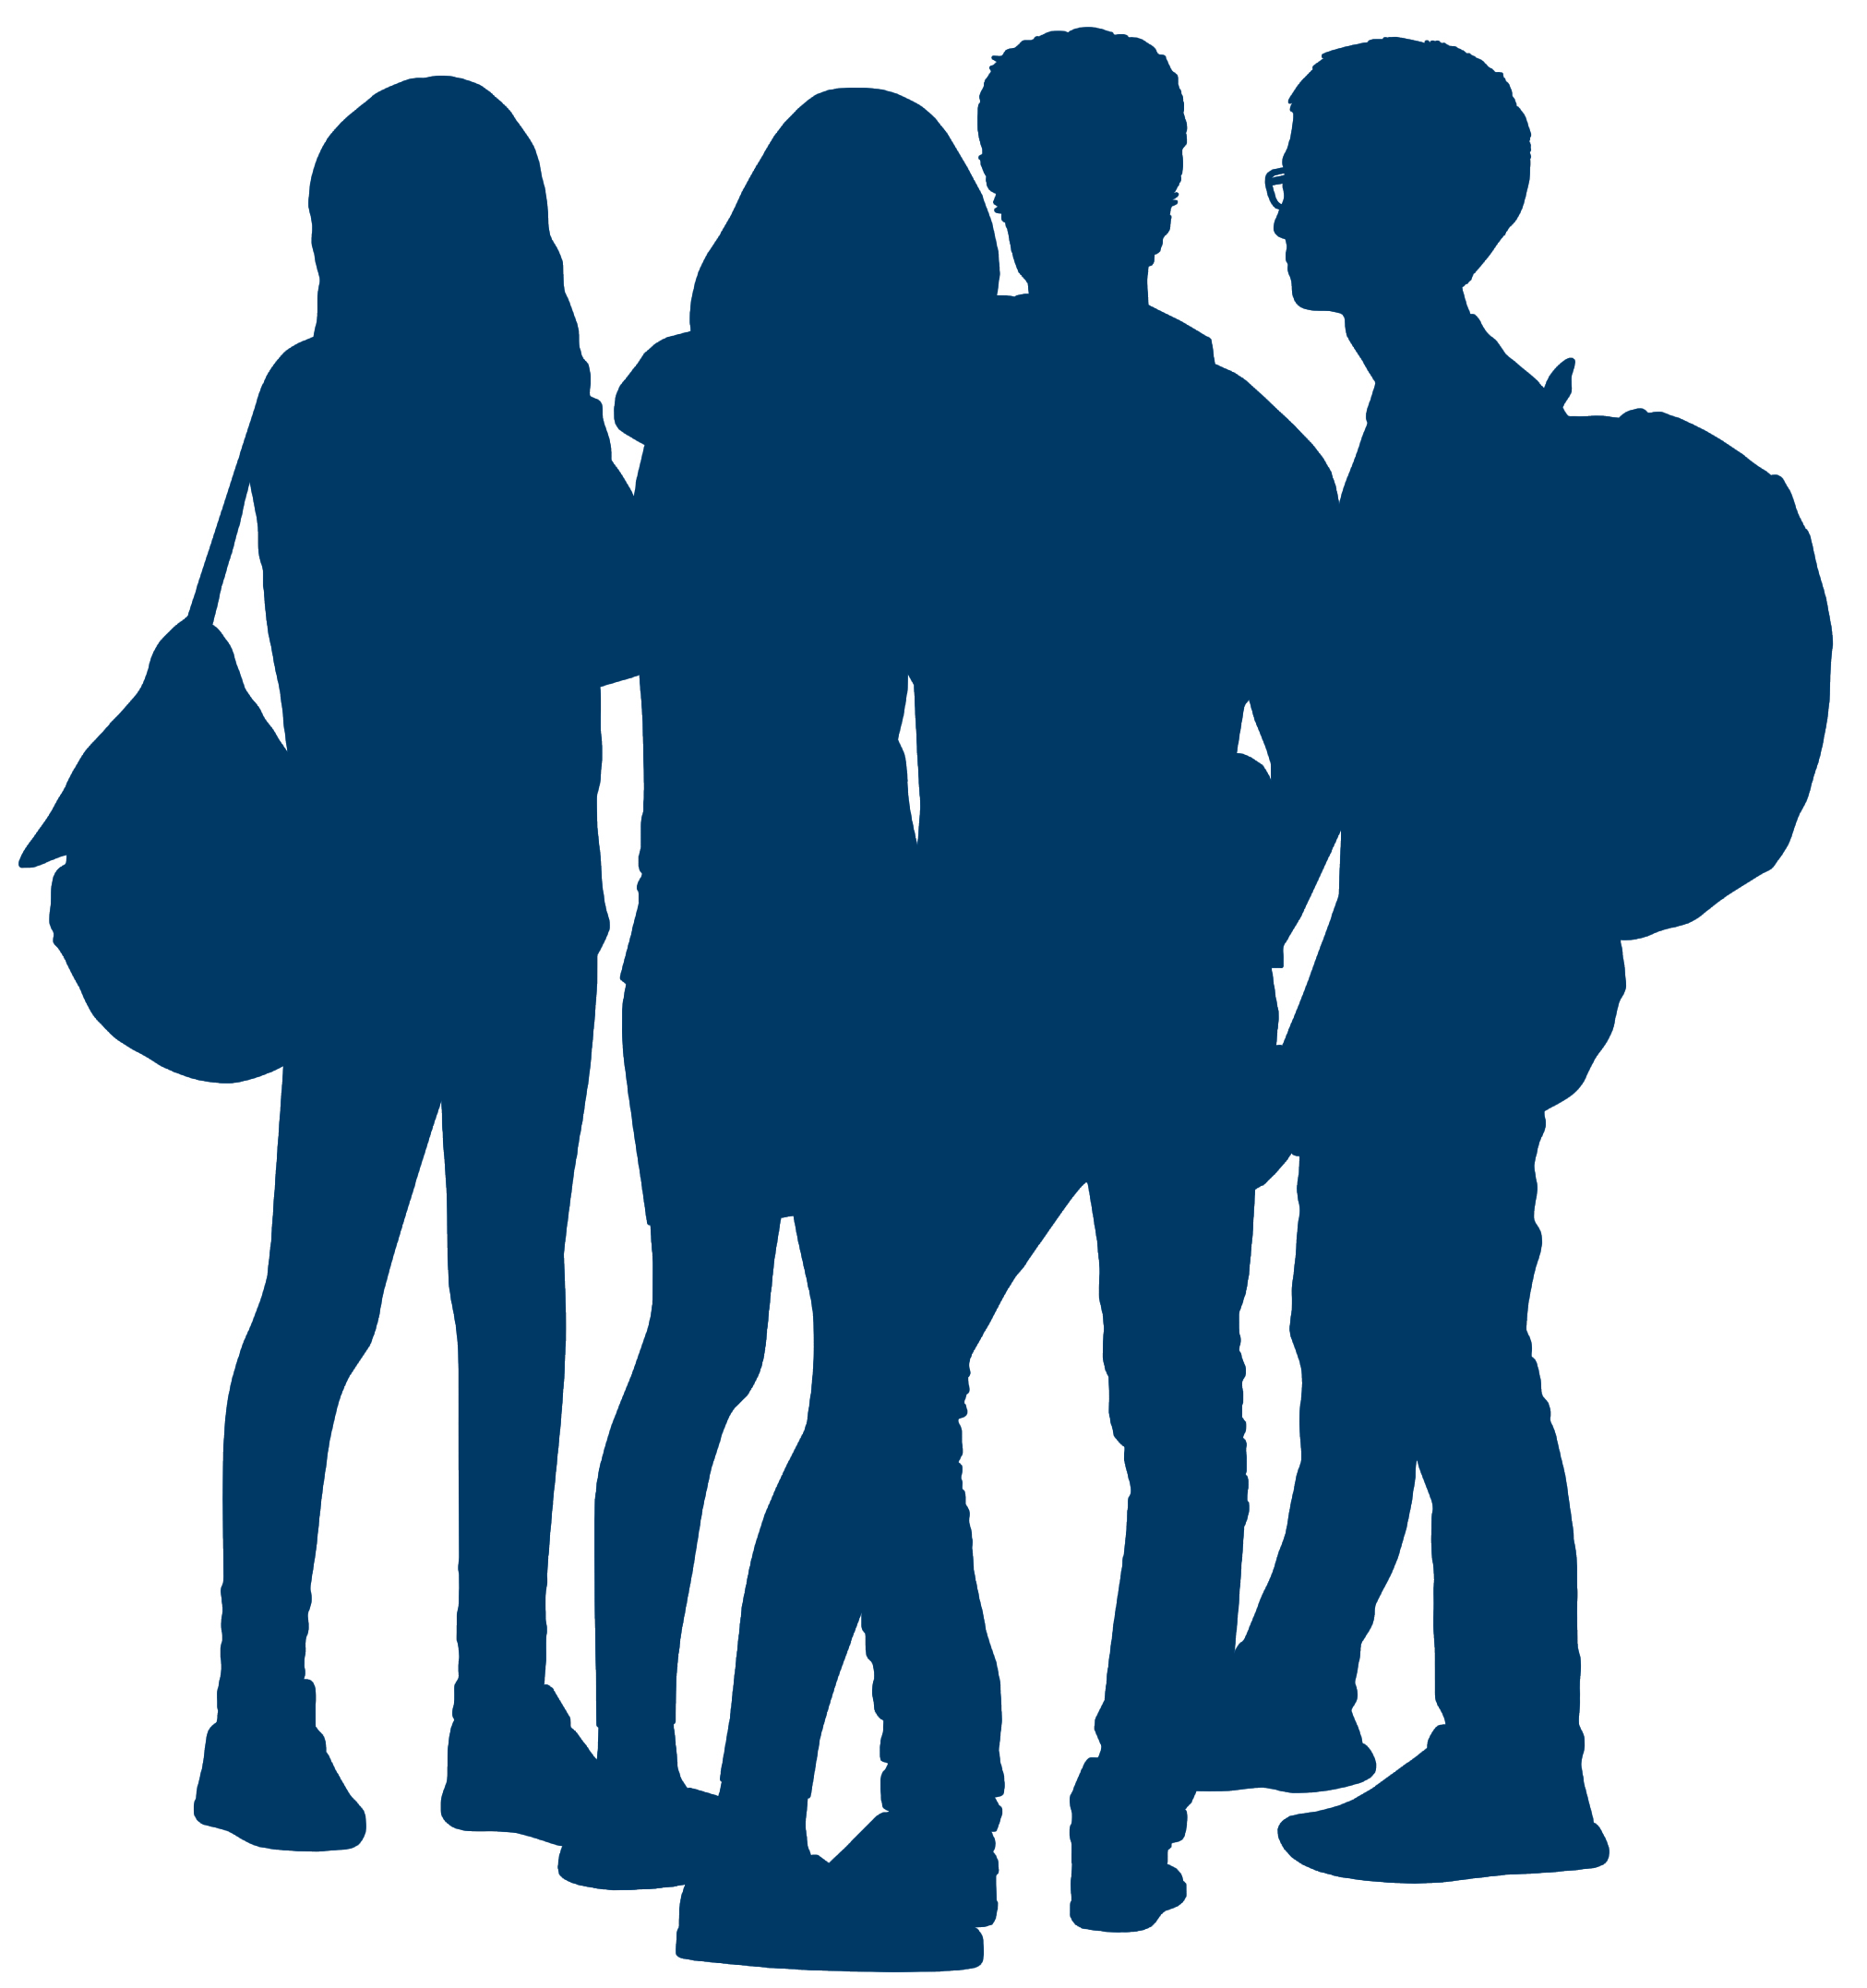 graphic of a group of teens